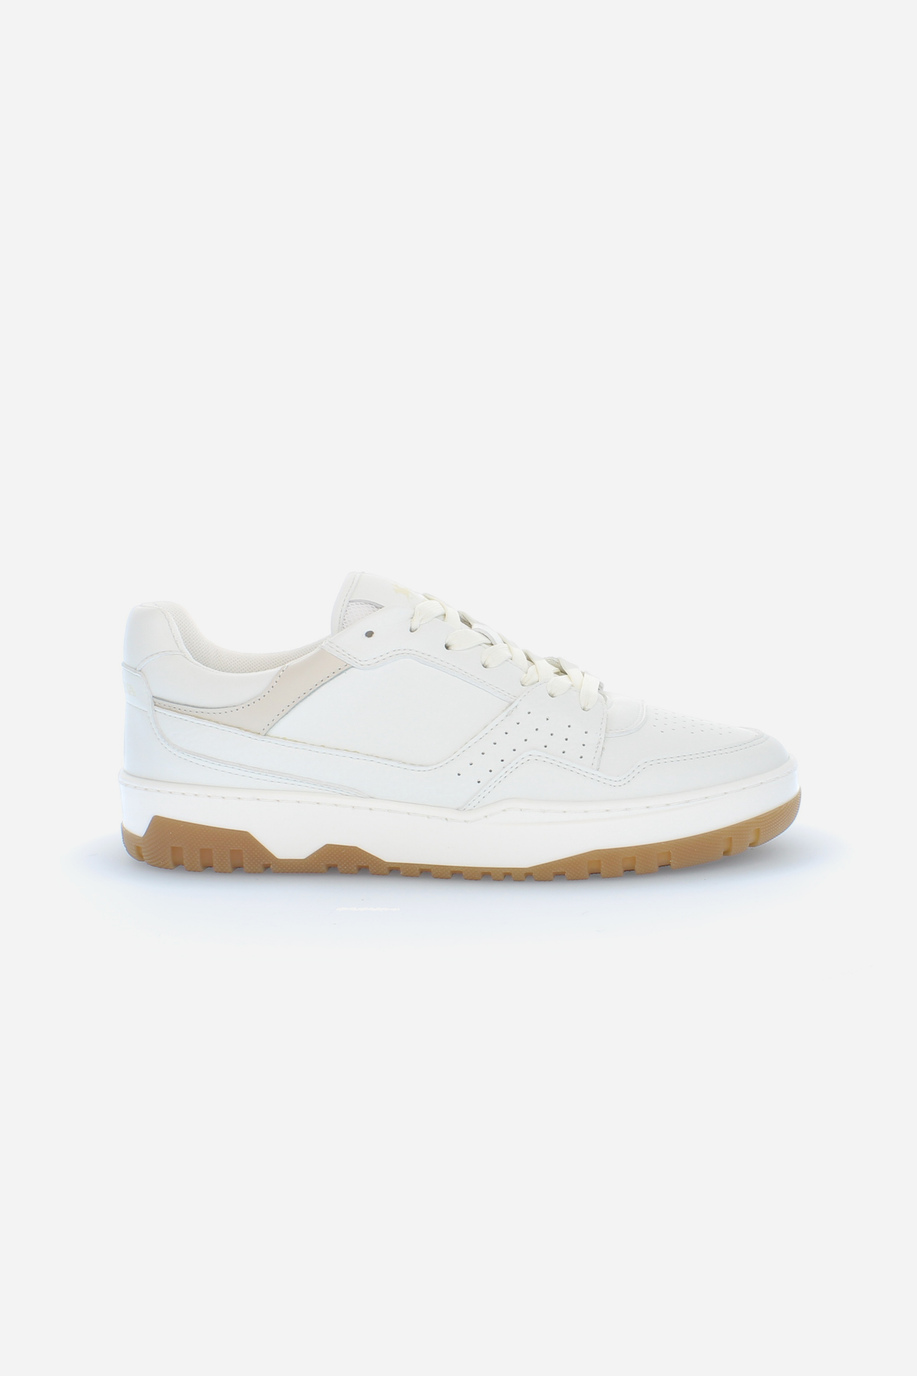 Women's vintage basketball sneaker in mixed vegetable leather - Field 85 - Sneakers Field 85 | La Martina - Official Online Shop